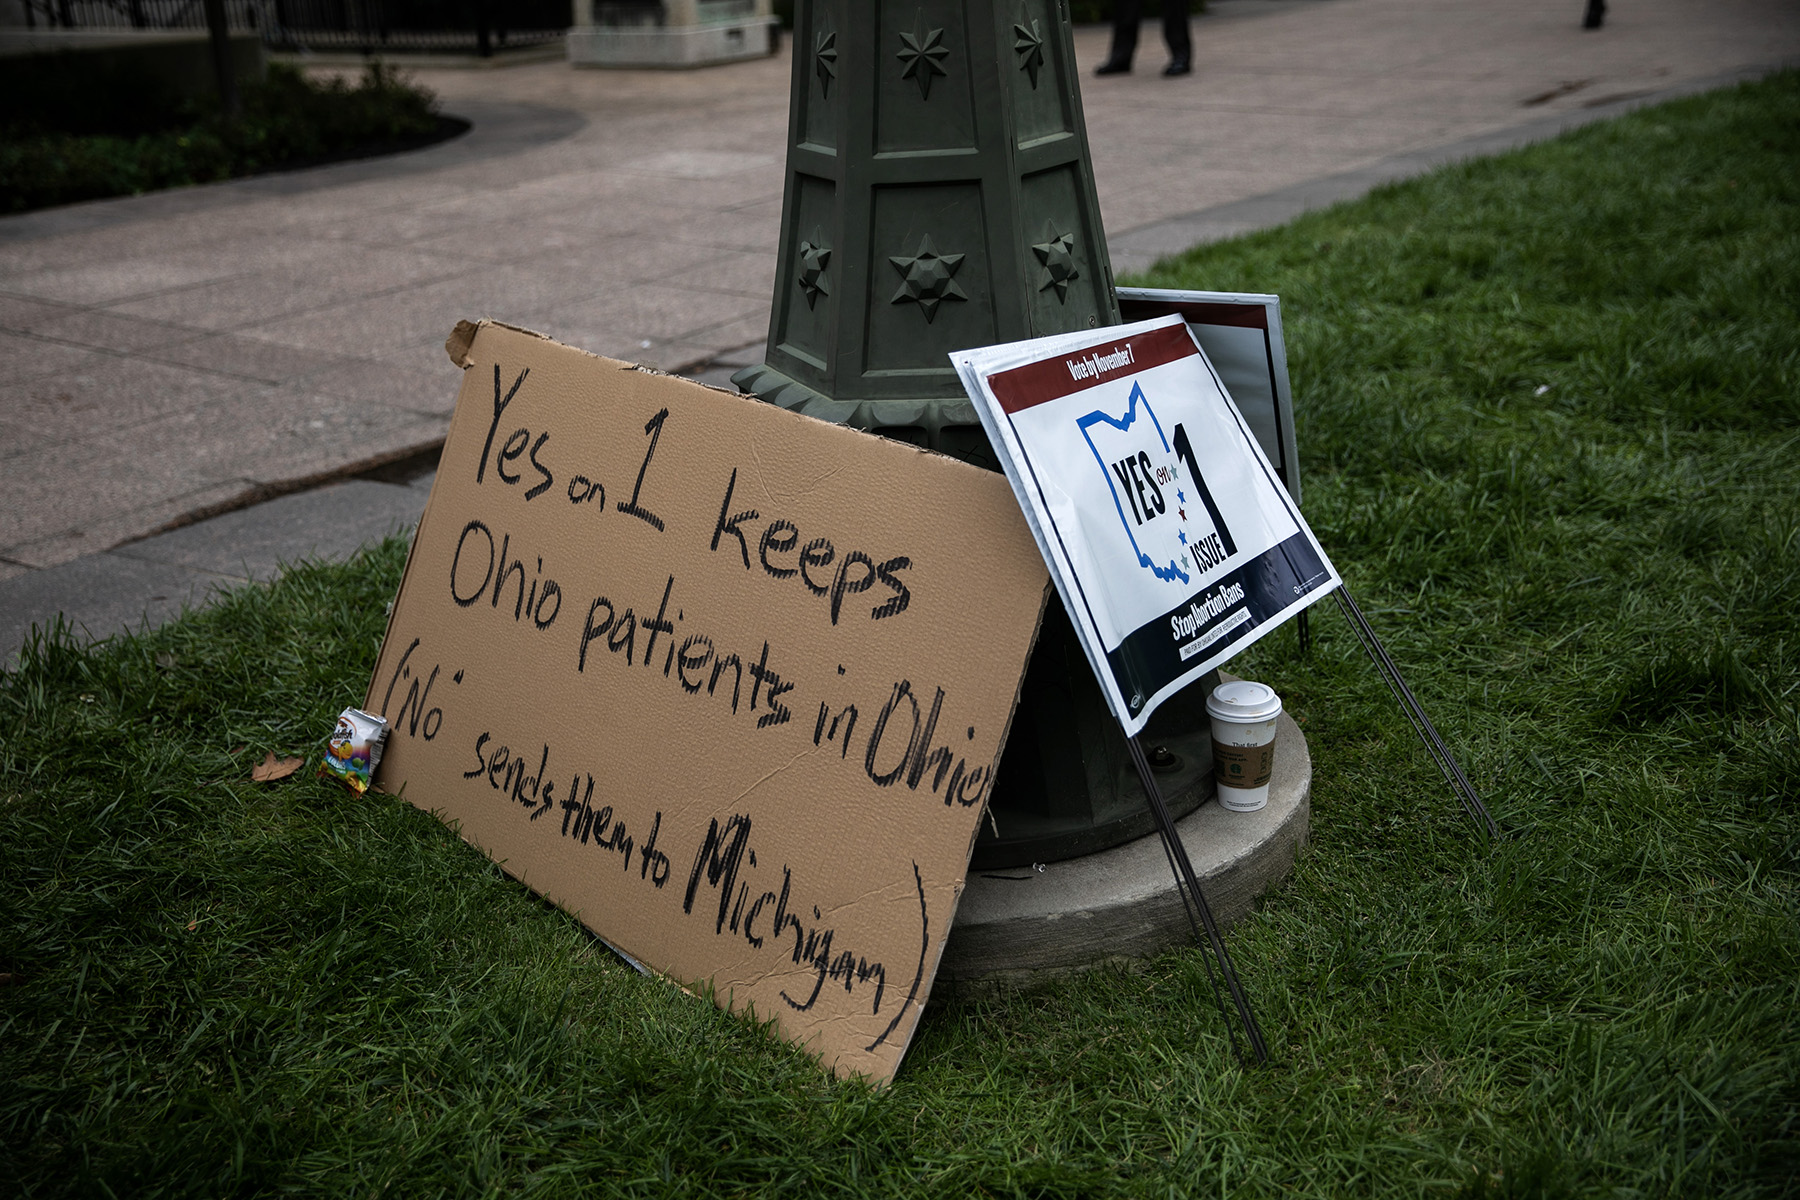 Signs for Issue 1 at a rally hosted by Ohioans United for Reproductive Rights outside of the Ohio Statehouse. They read "Yes on 1 Keeps Ohio Patients in Ohio ("No" sends them to Michigan)" and "Yes on Issue 1"